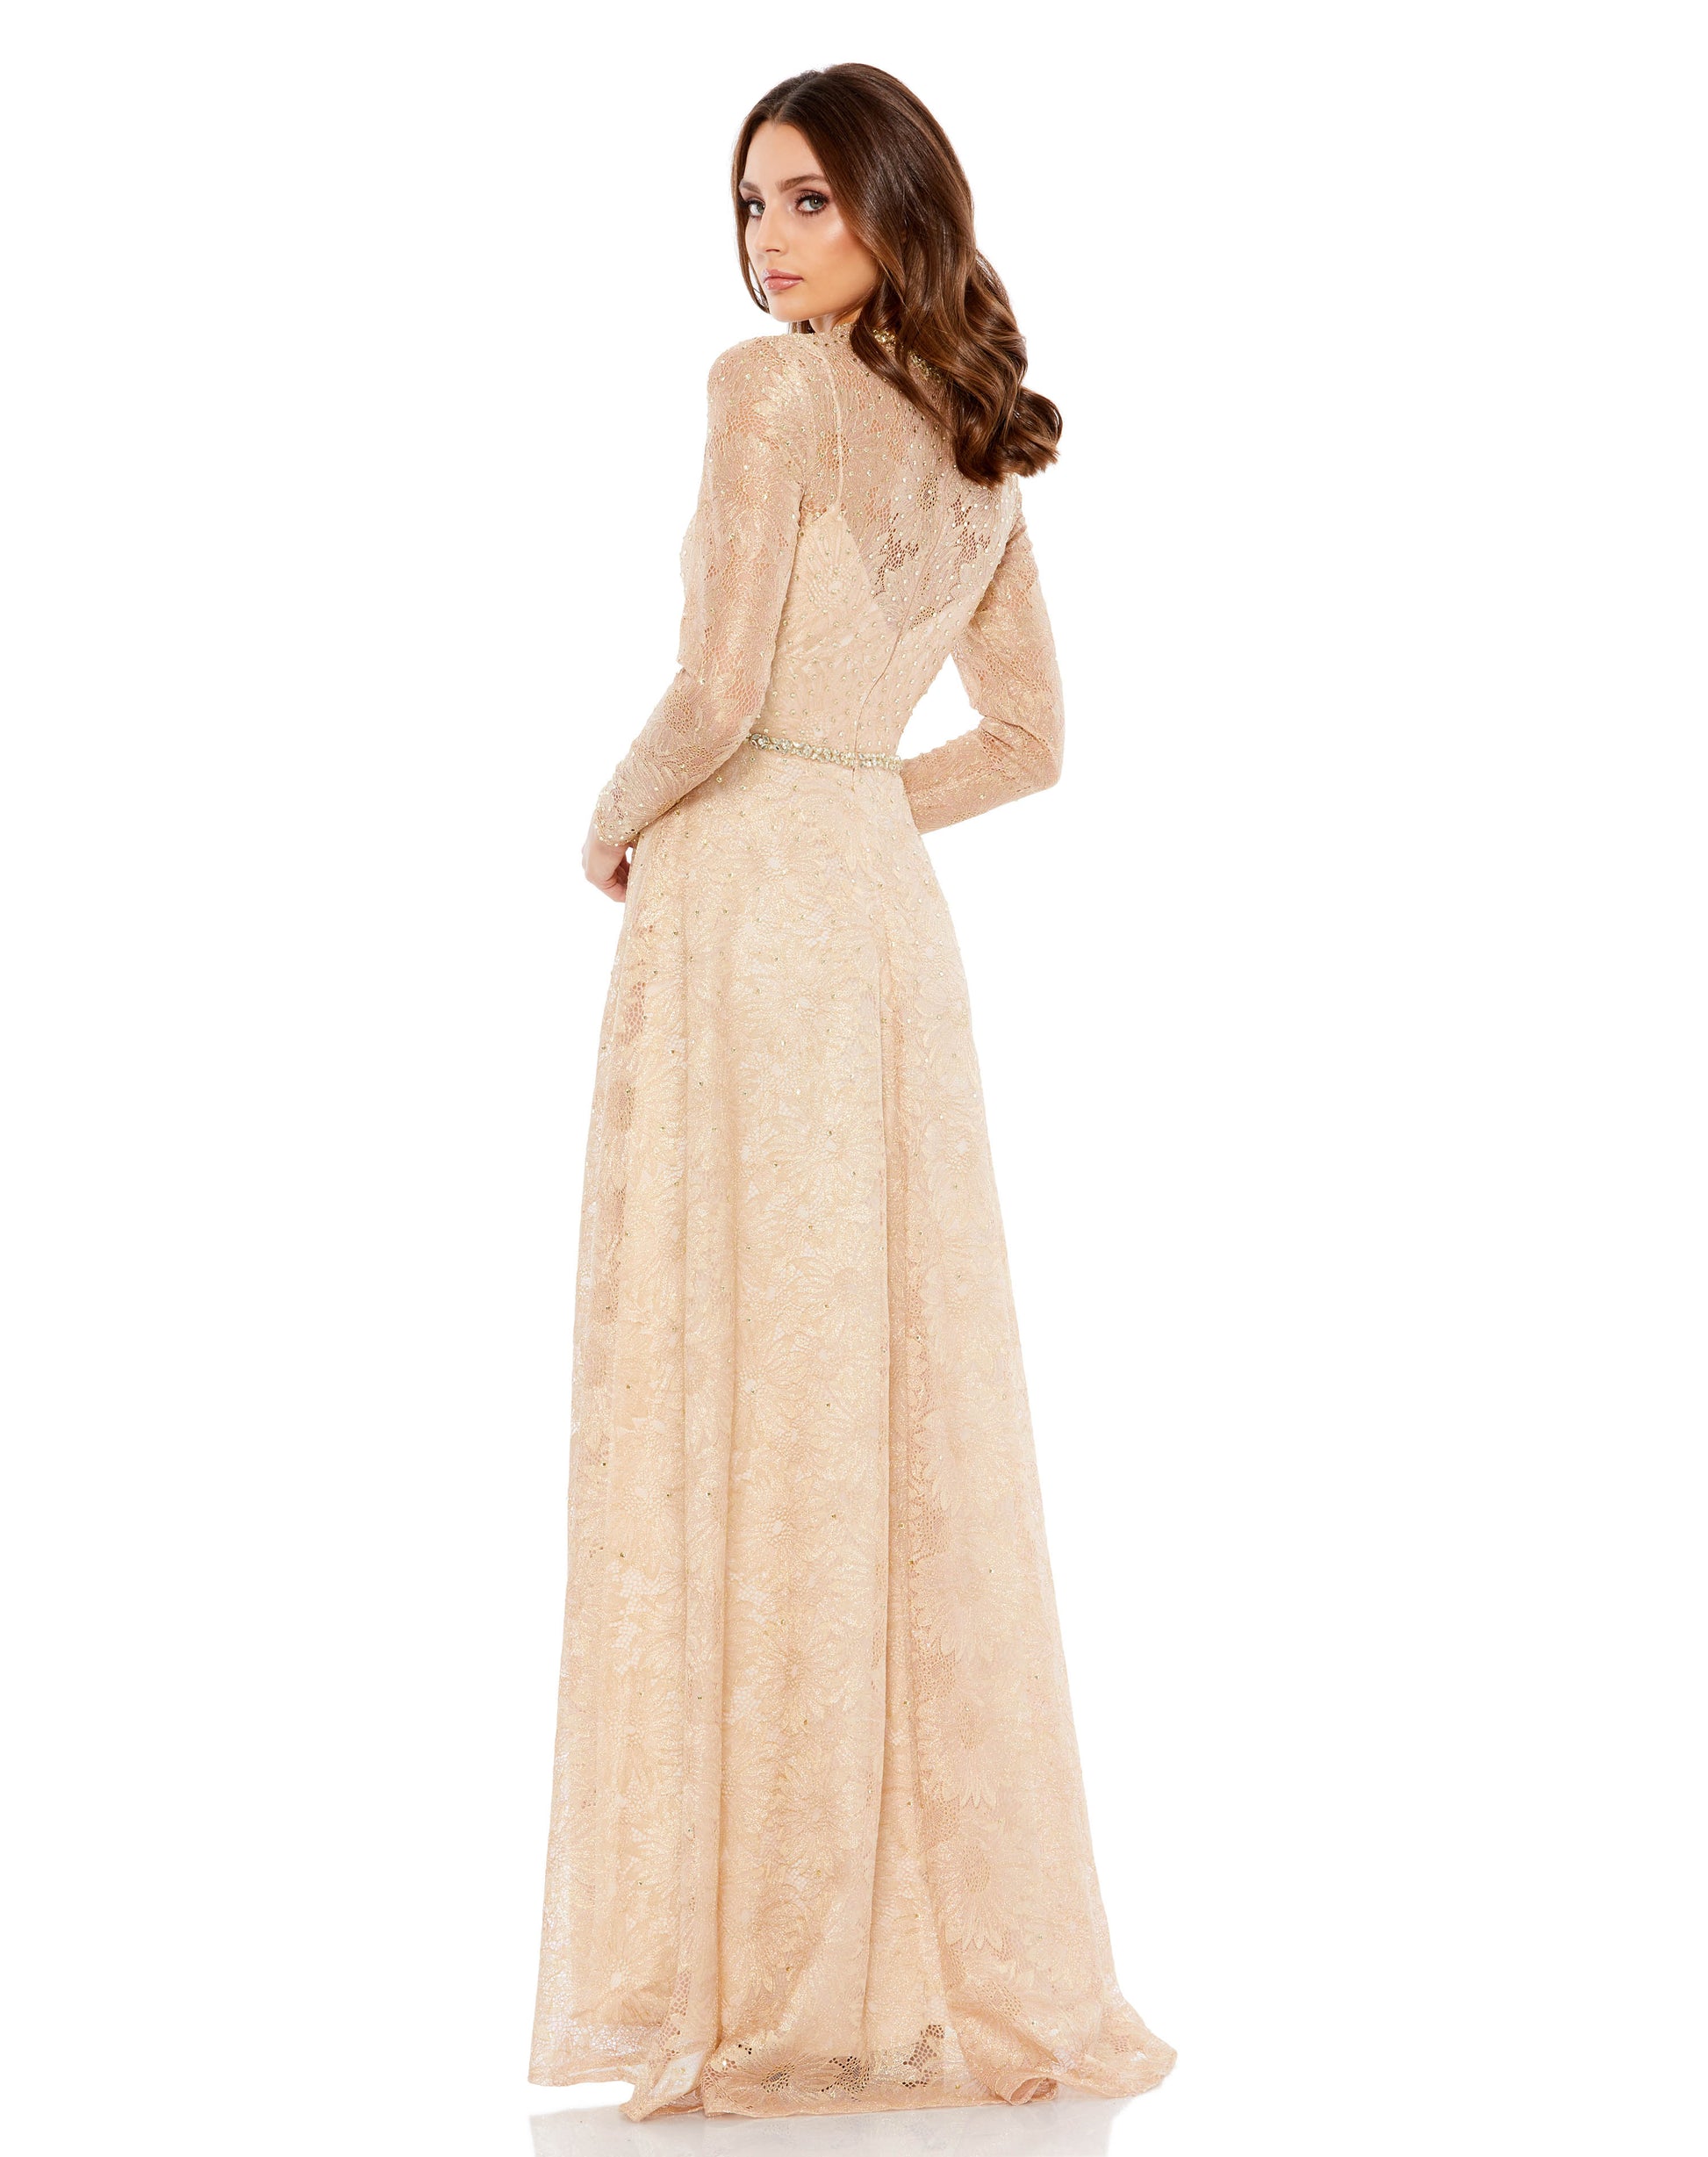 Elegant long-sleeved lace evening gown with an illusion neckline and sleeves, bejeweled neckline, and a flowing a-line skirt. The natural waist is accented by a stunning jeweled belt. Sleeves feature hidden zippers for easy dressing. Mac Duggal Partially